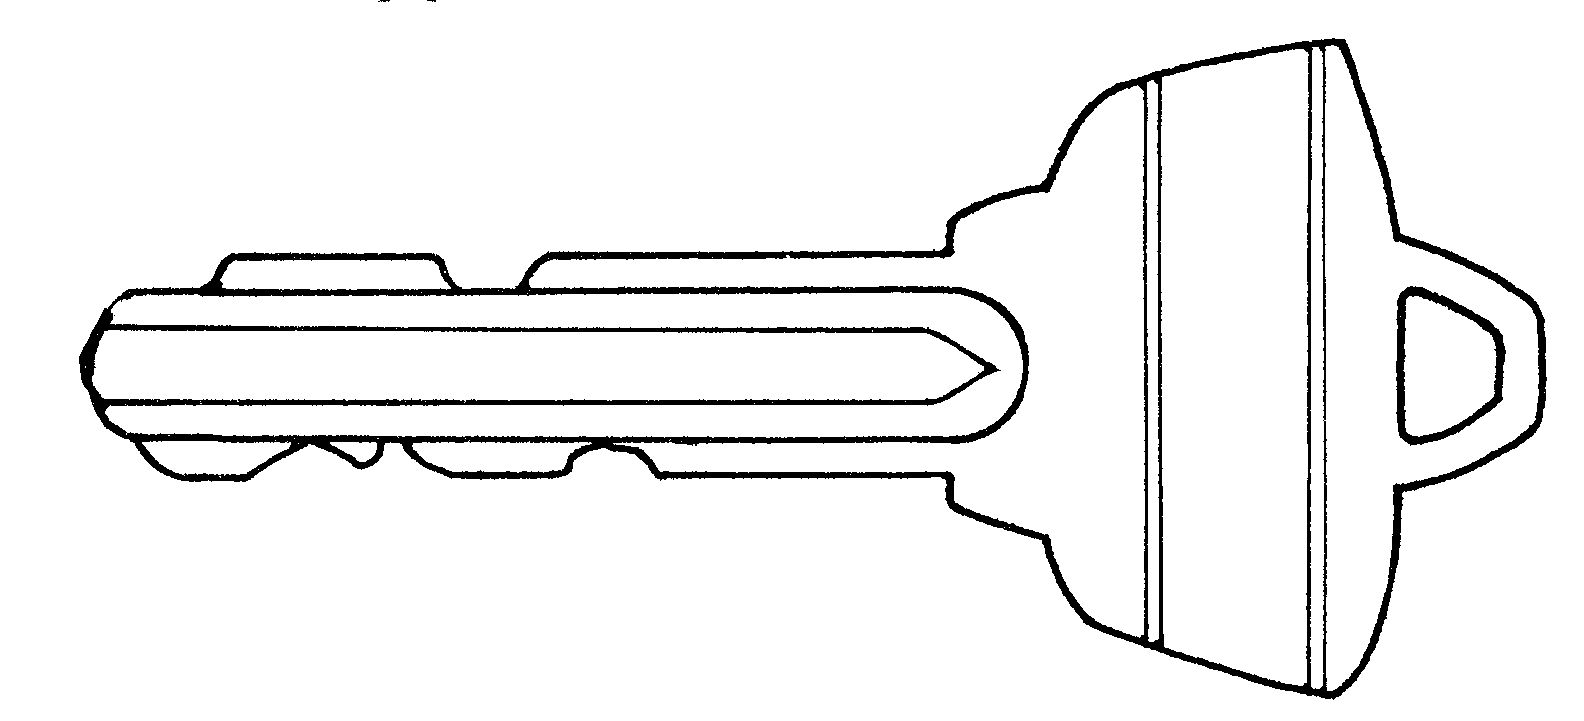 clipart keys pictures - photo #30